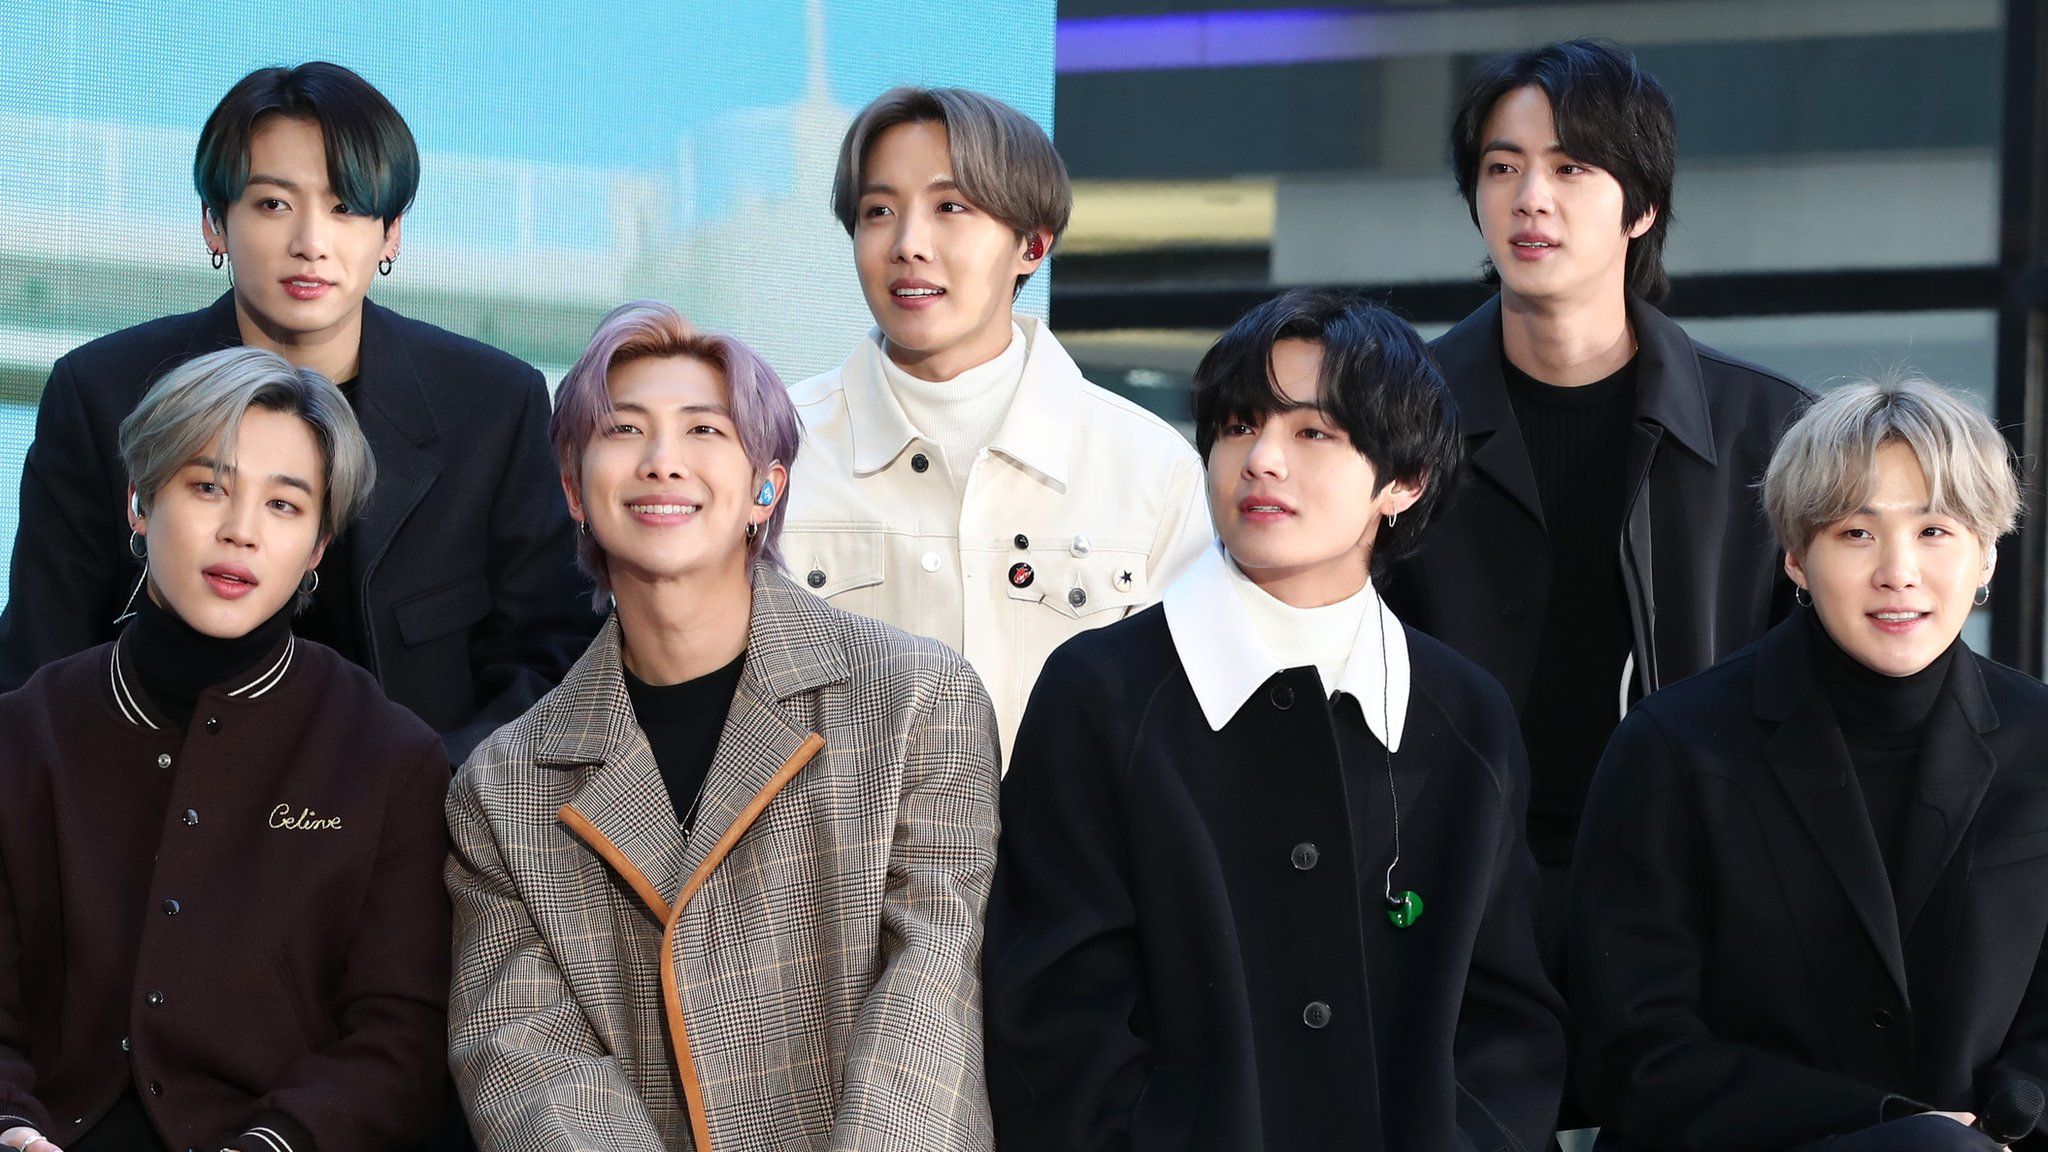 BTS becomes the most viewed artist on YouTube